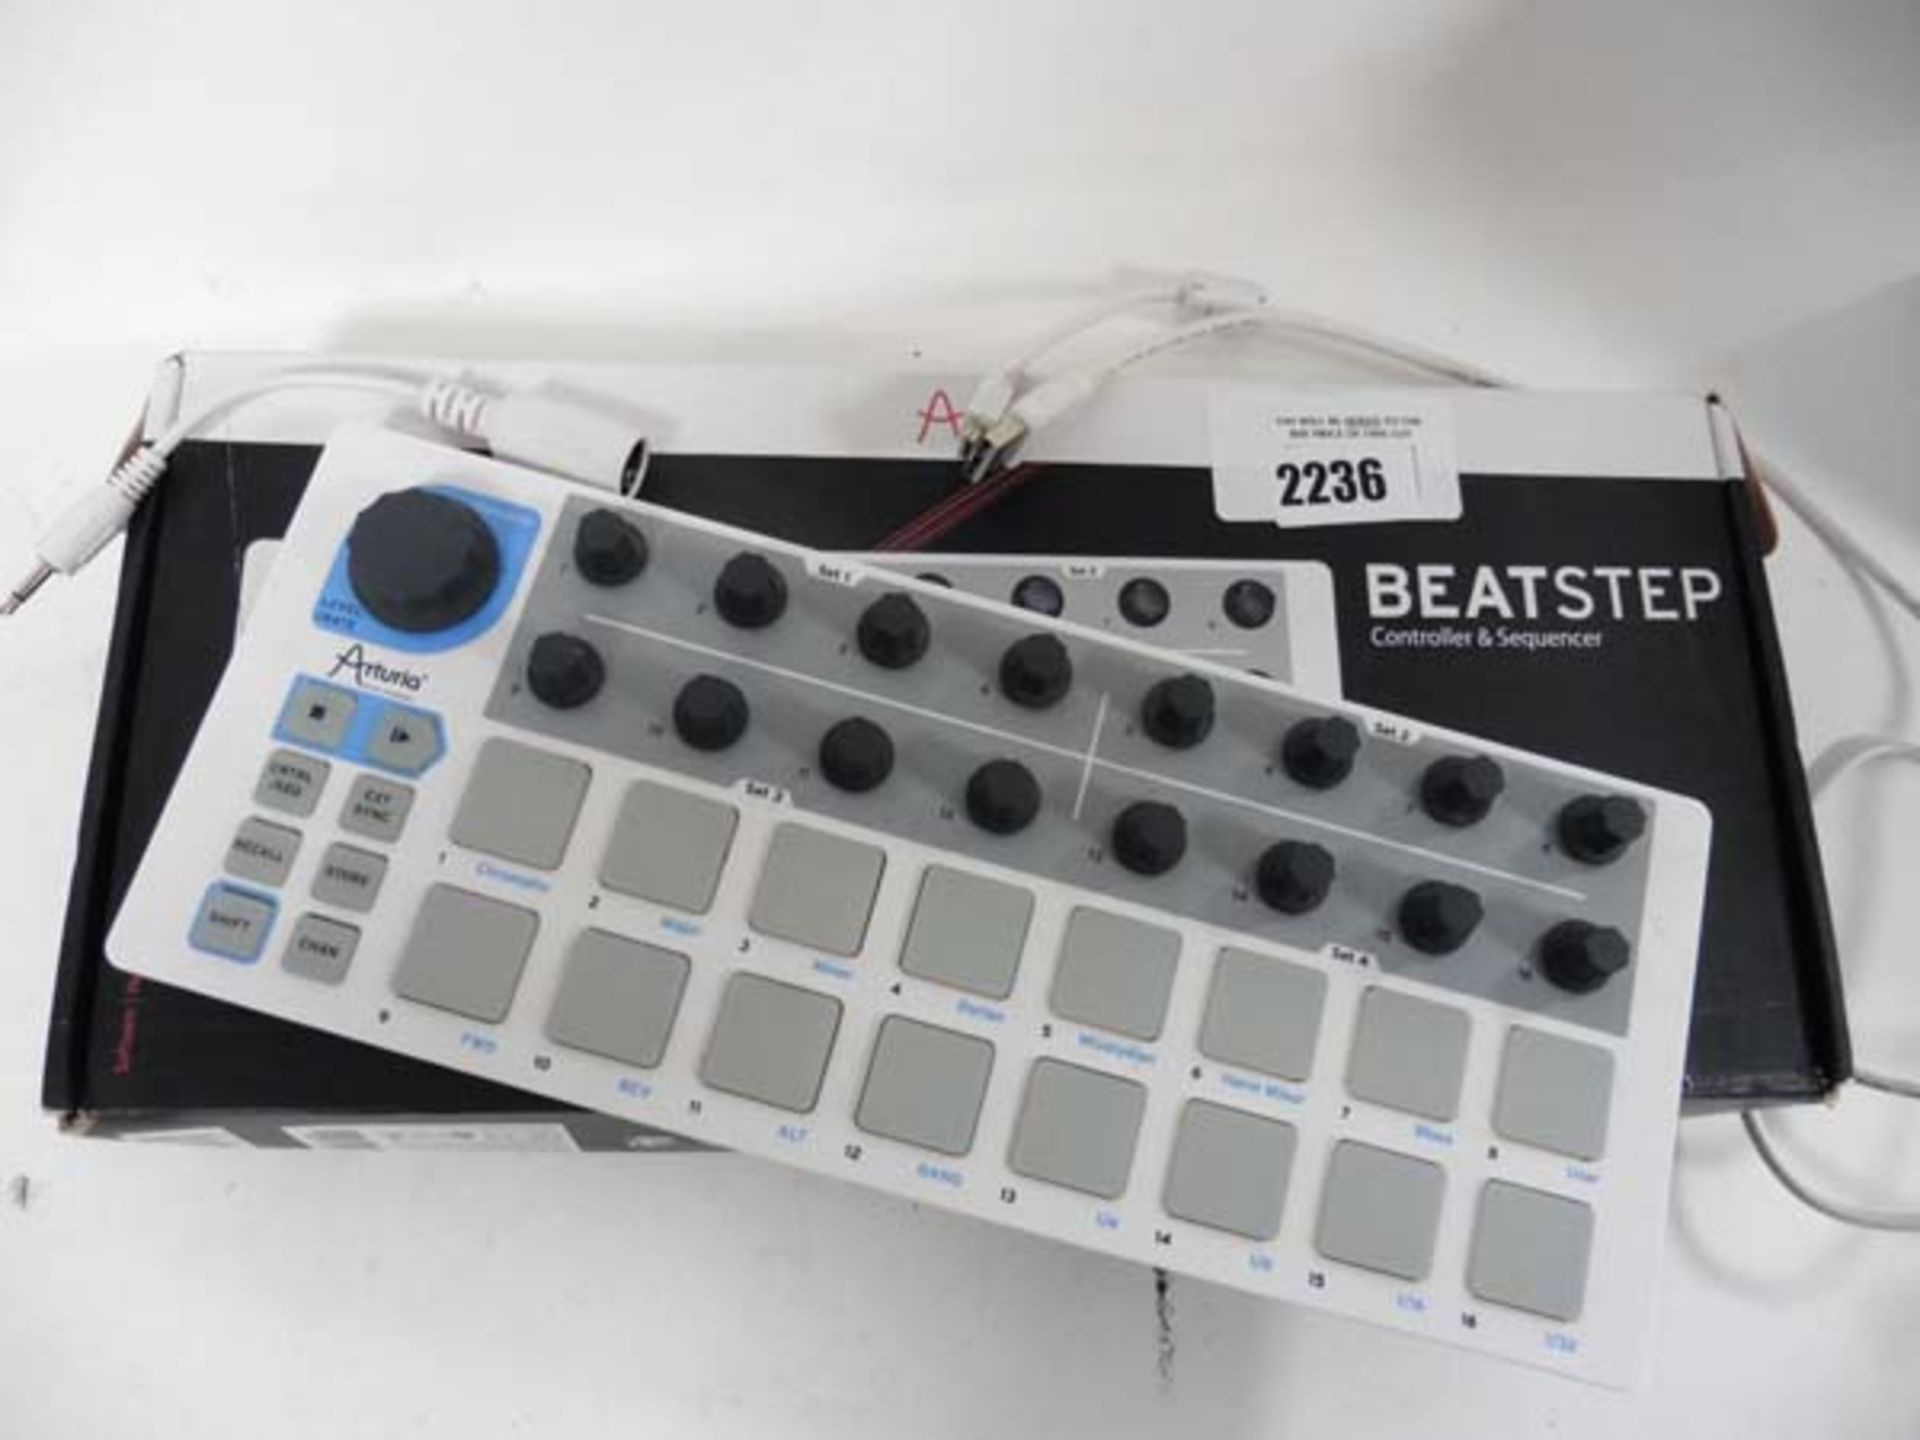 Arturia musical Instruments Beatstep controller & Sequencer in box